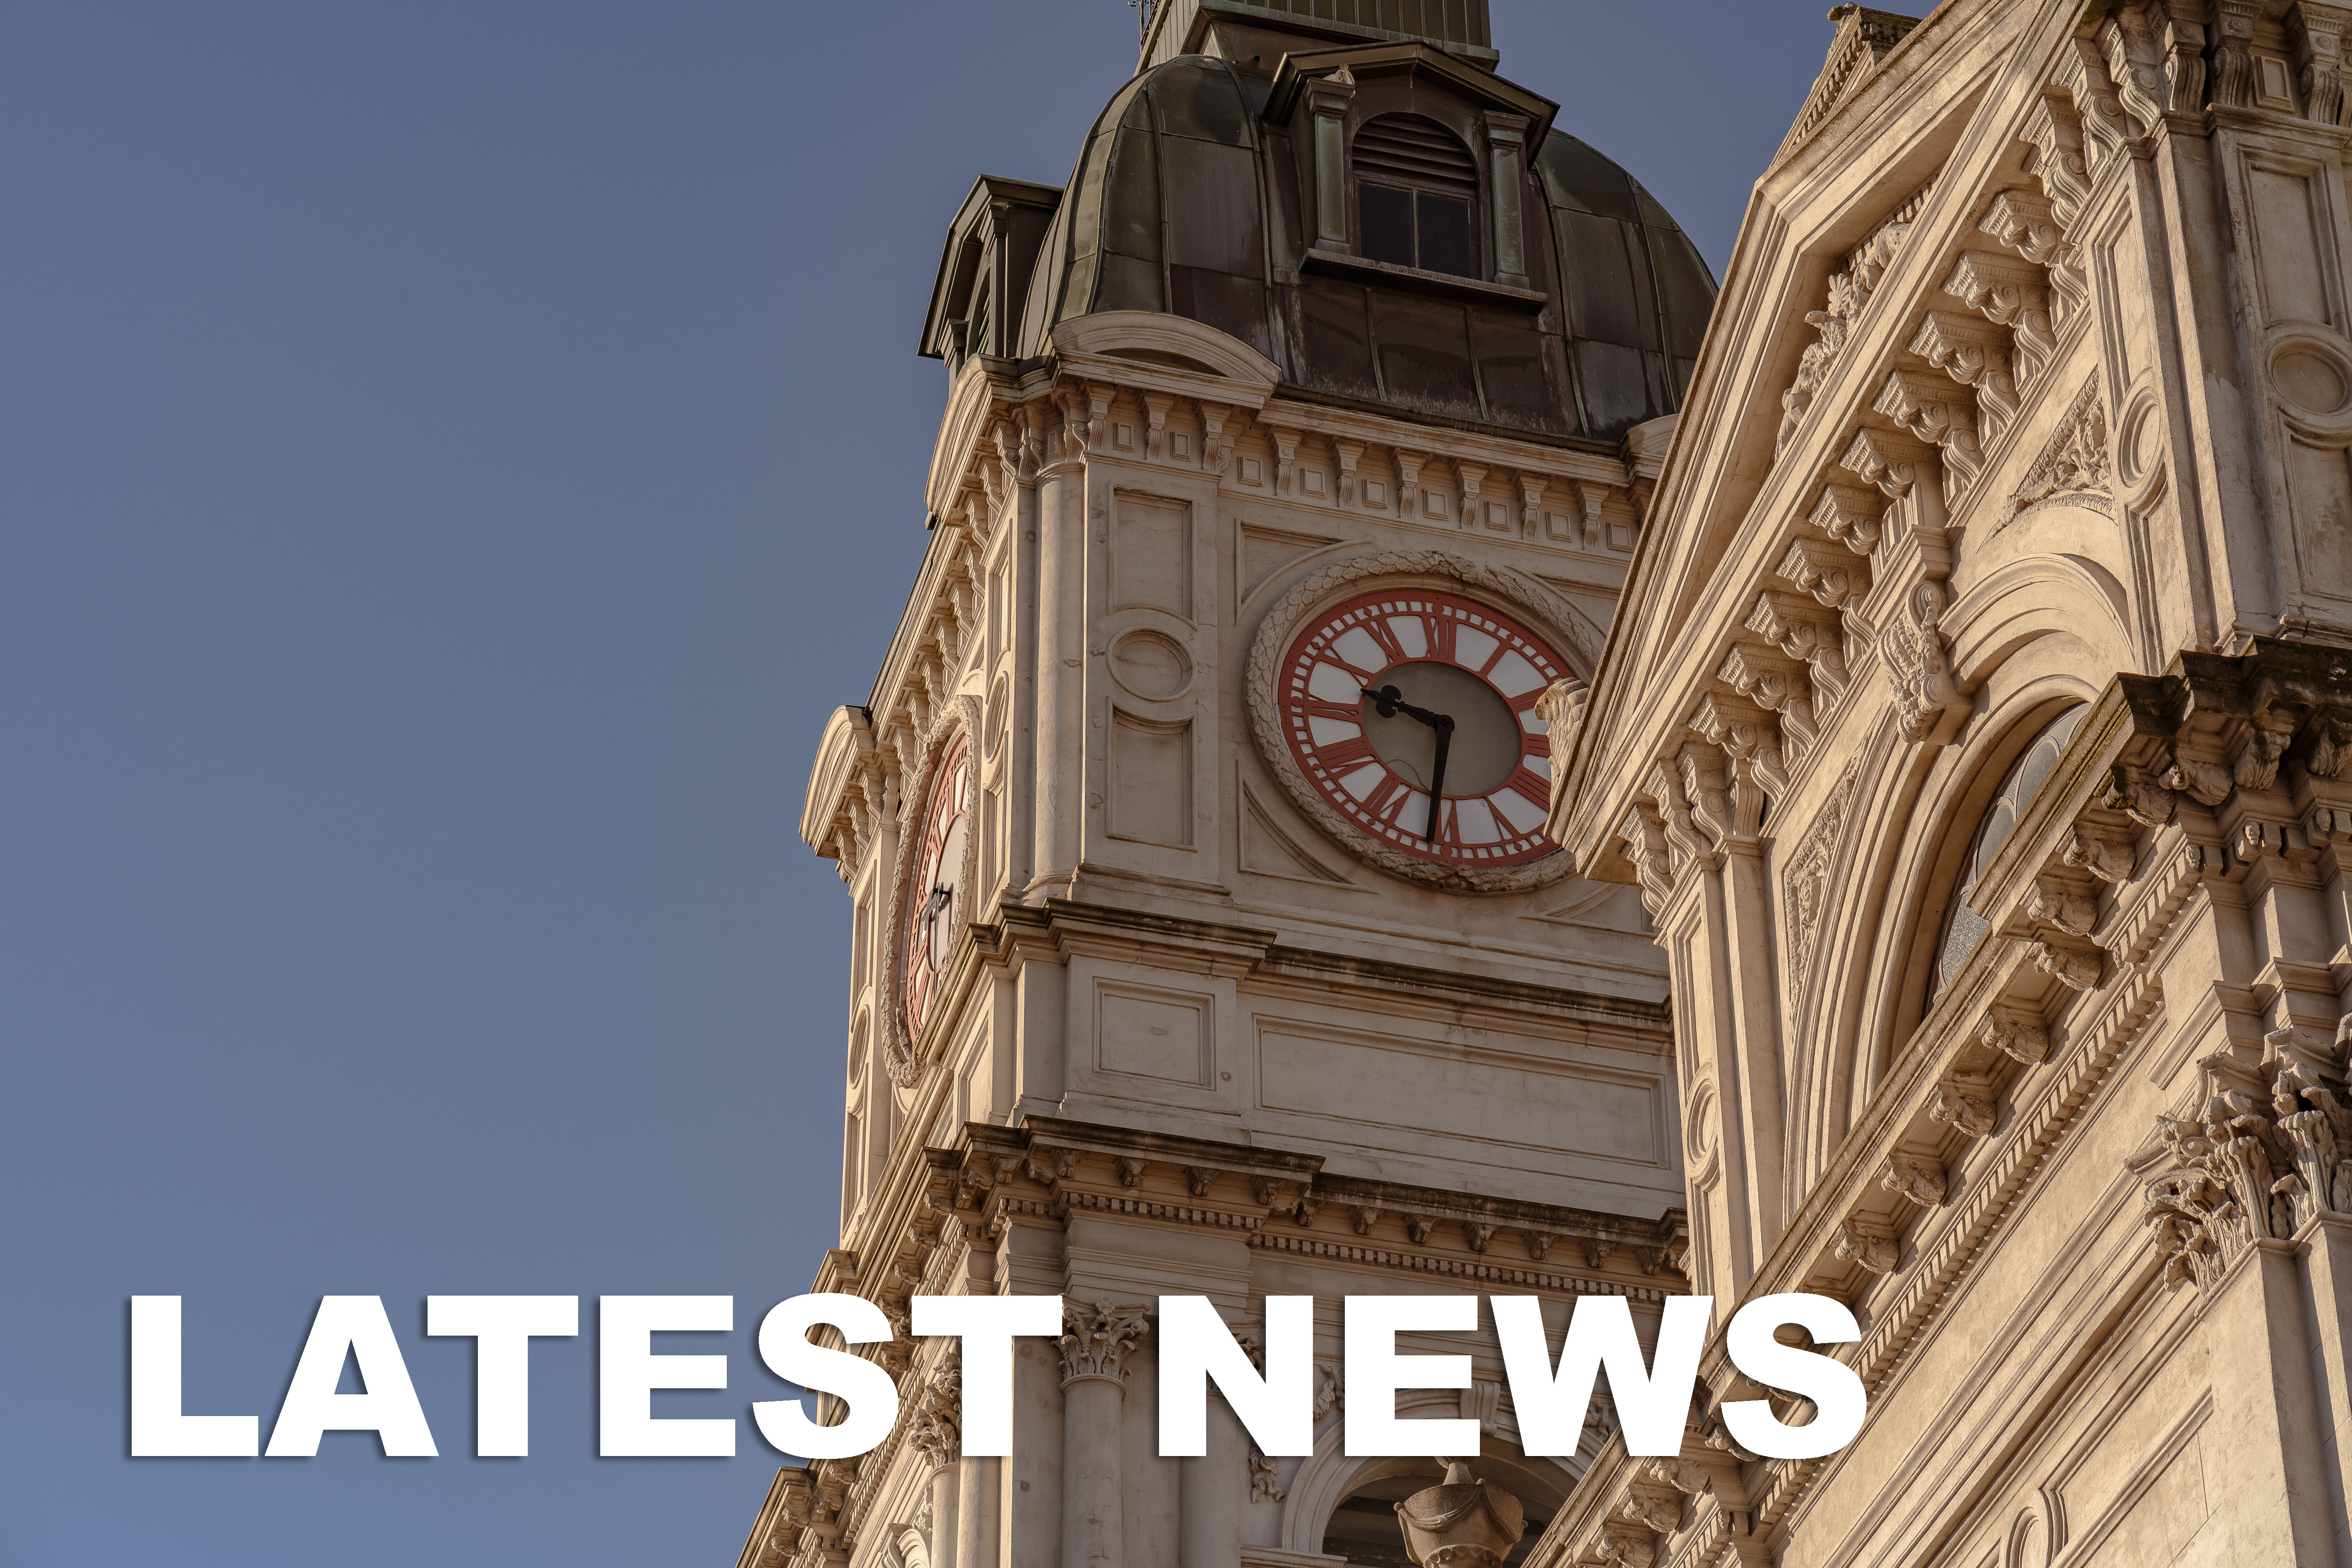 Image of Town Hall clock with text inset that reads latest news